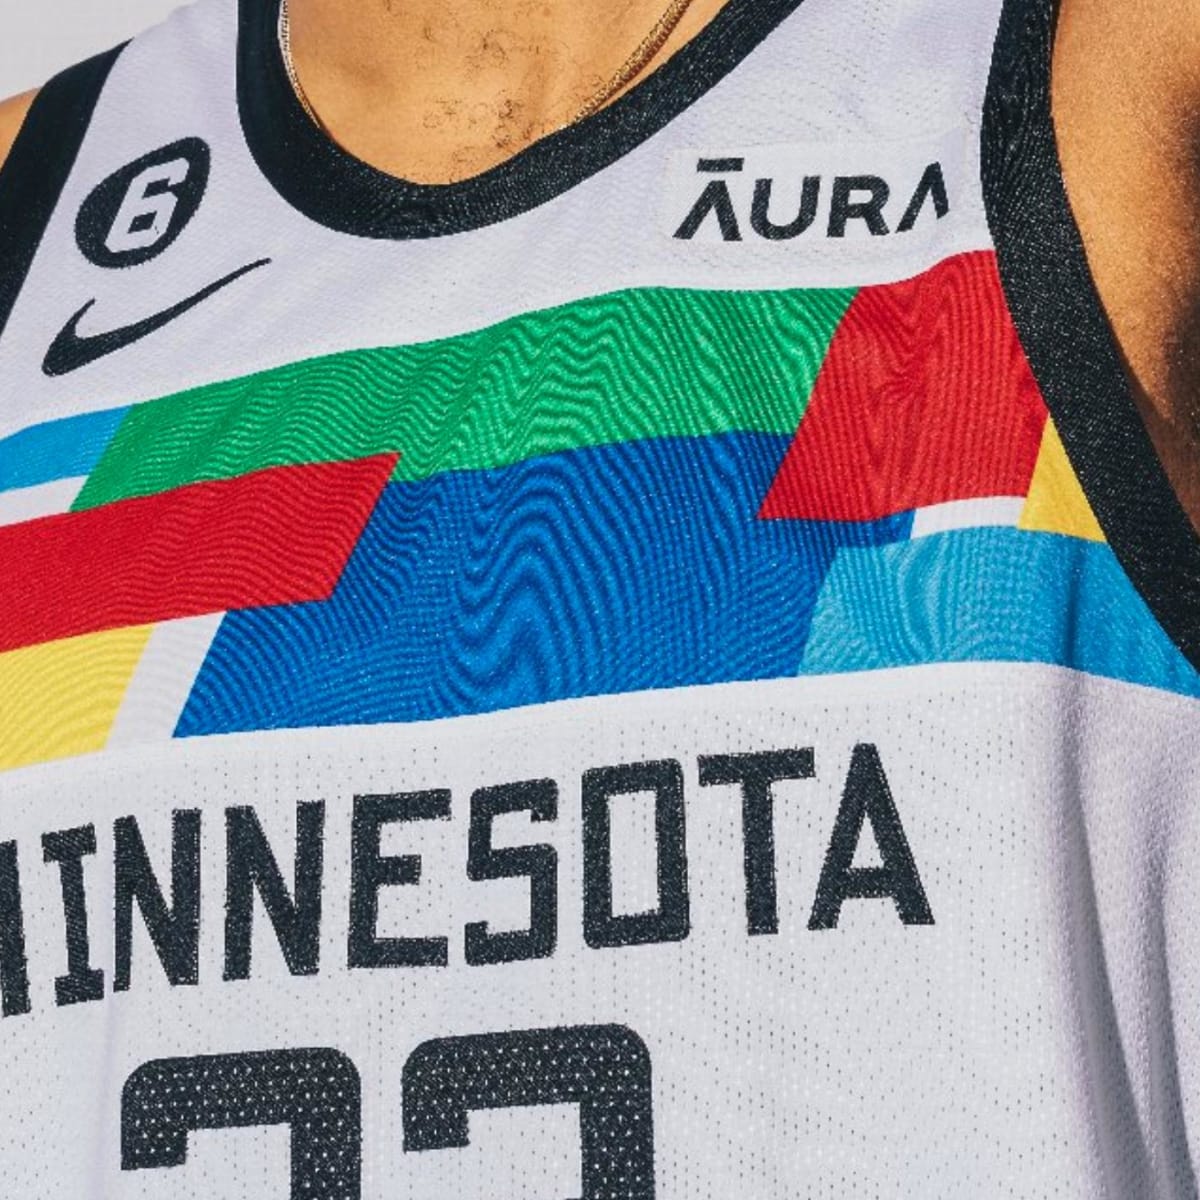 Minnesota T-Wolves Unveil New Wolfpack-Inspired Uniforms